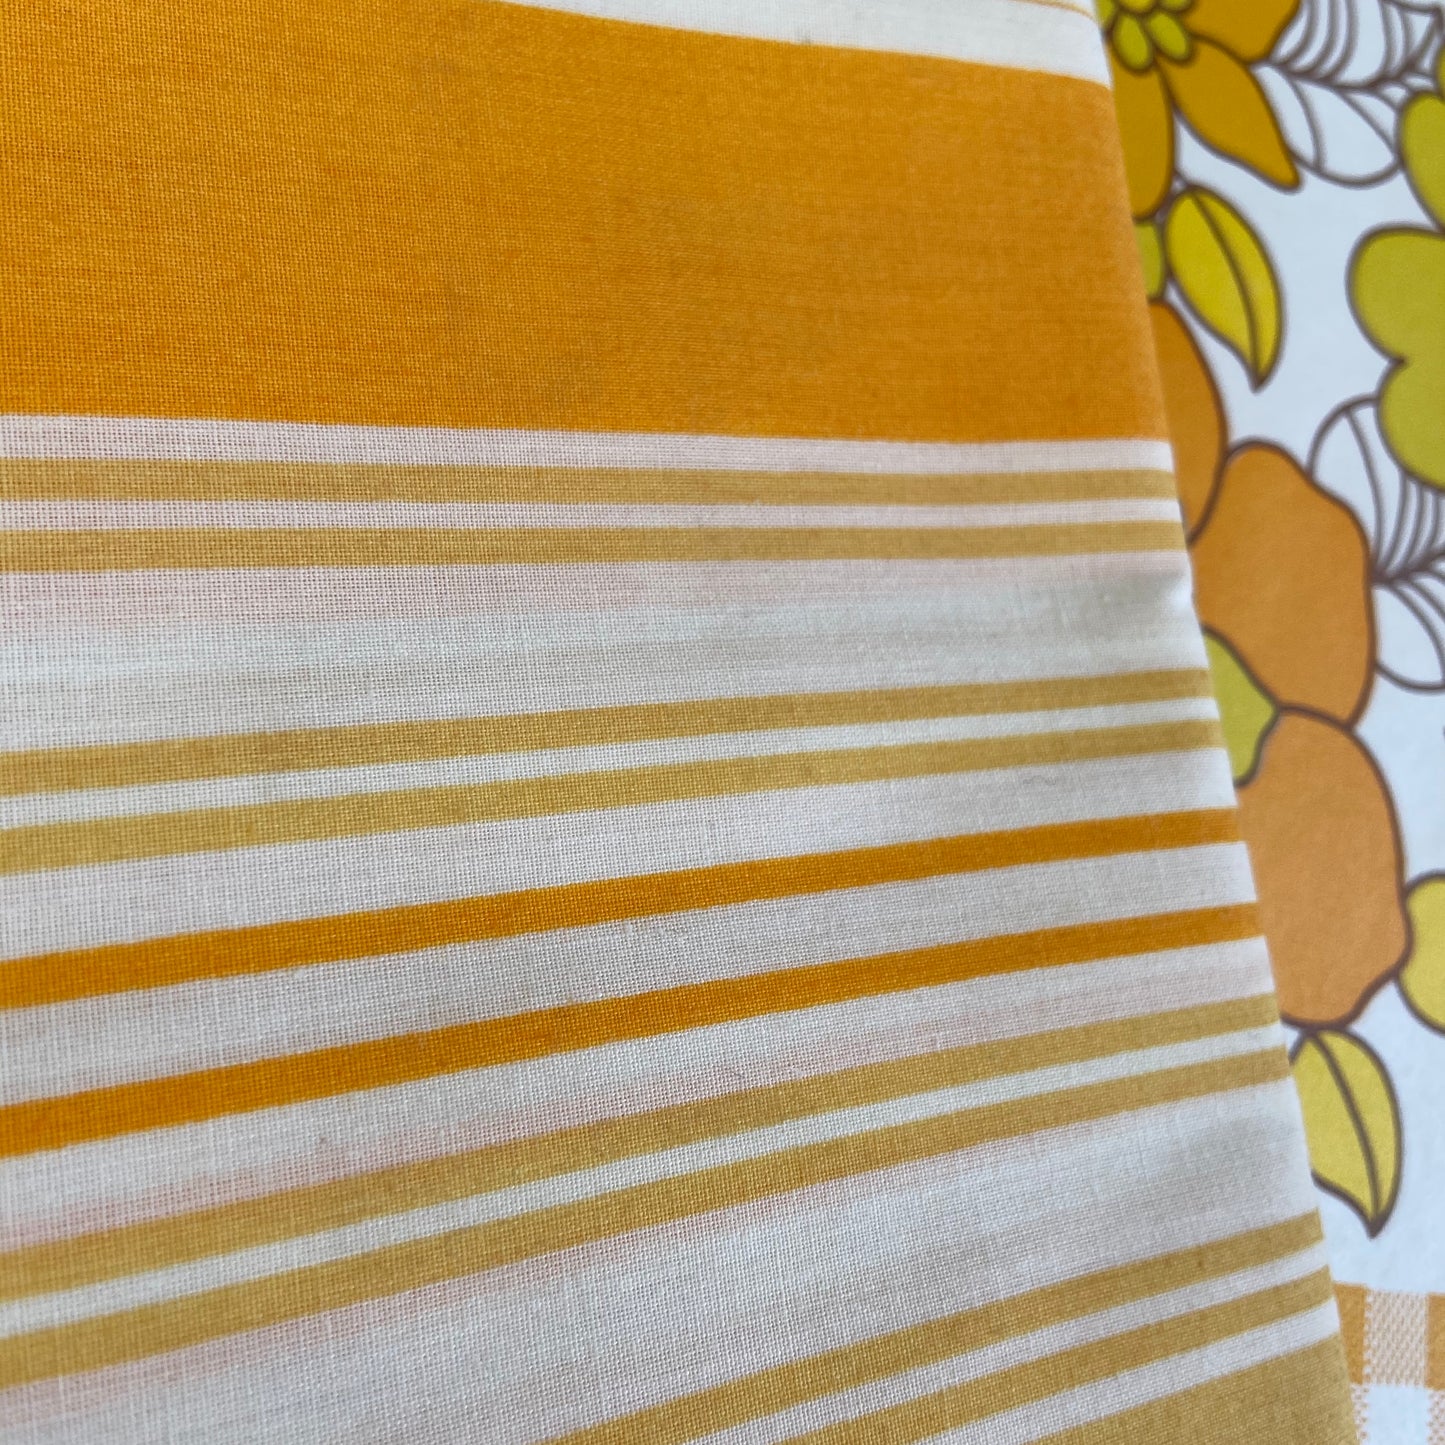 Cotton Blend SHEET Flat Fabric Stripes Apricot UNUSED in Packet